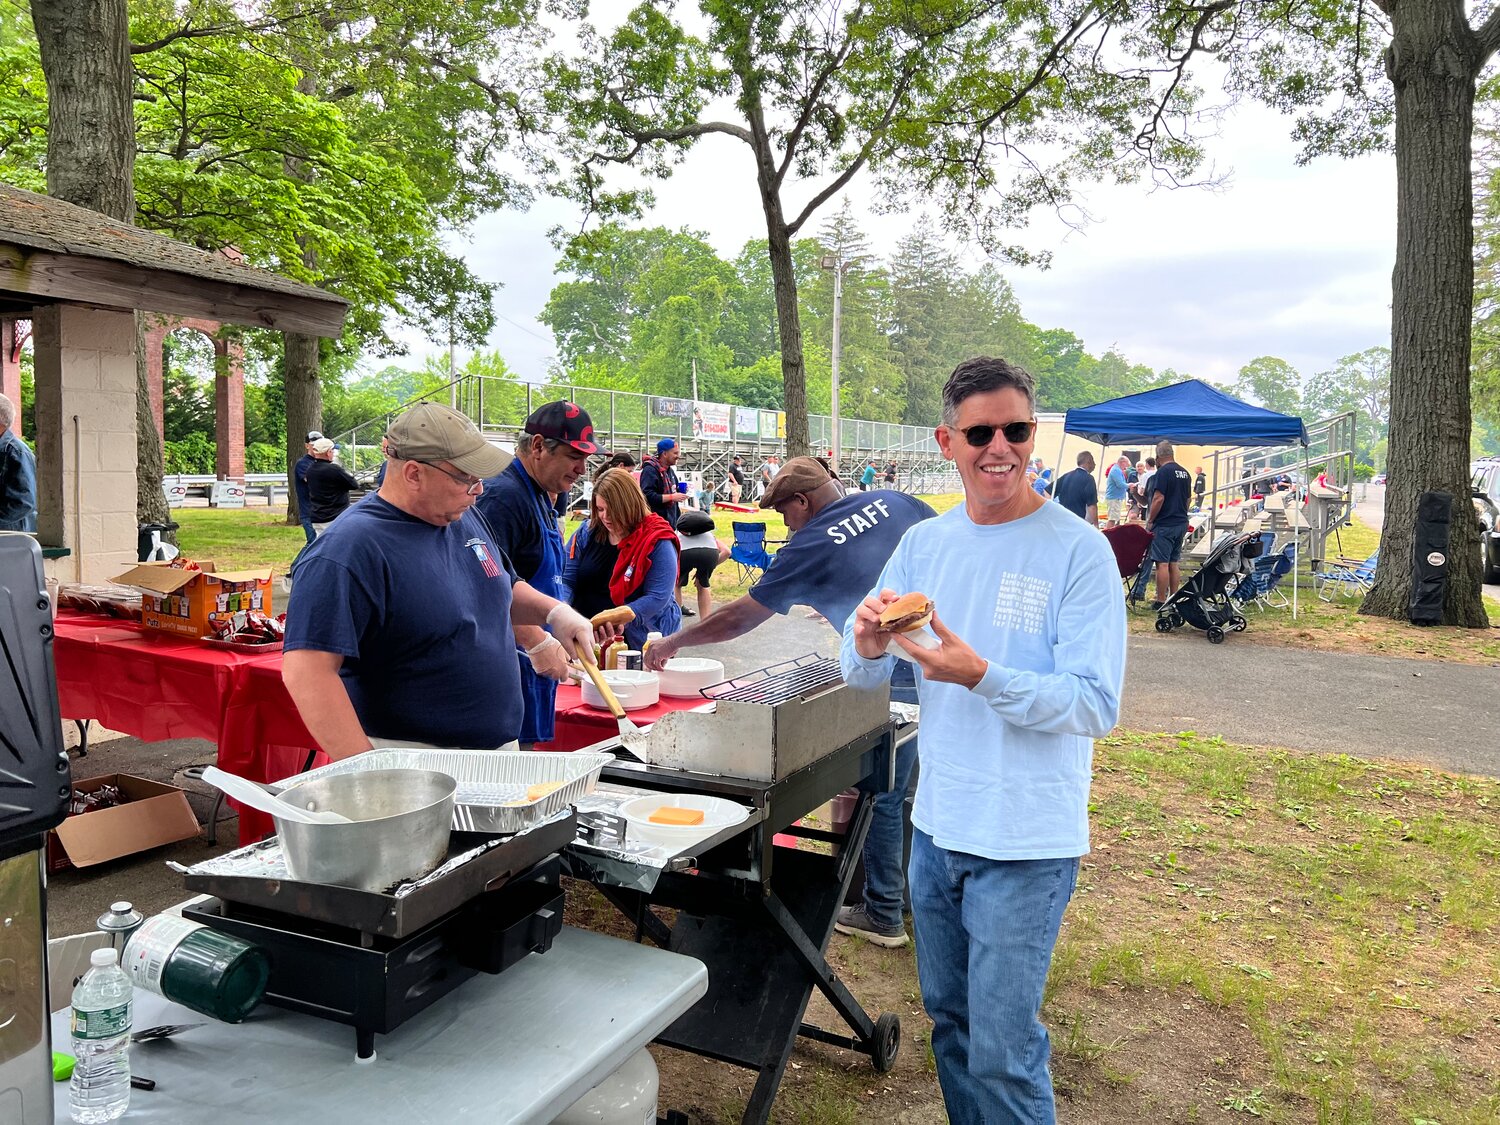 Members of the community enjoyed barbecue and craft beers from seven local breweries.